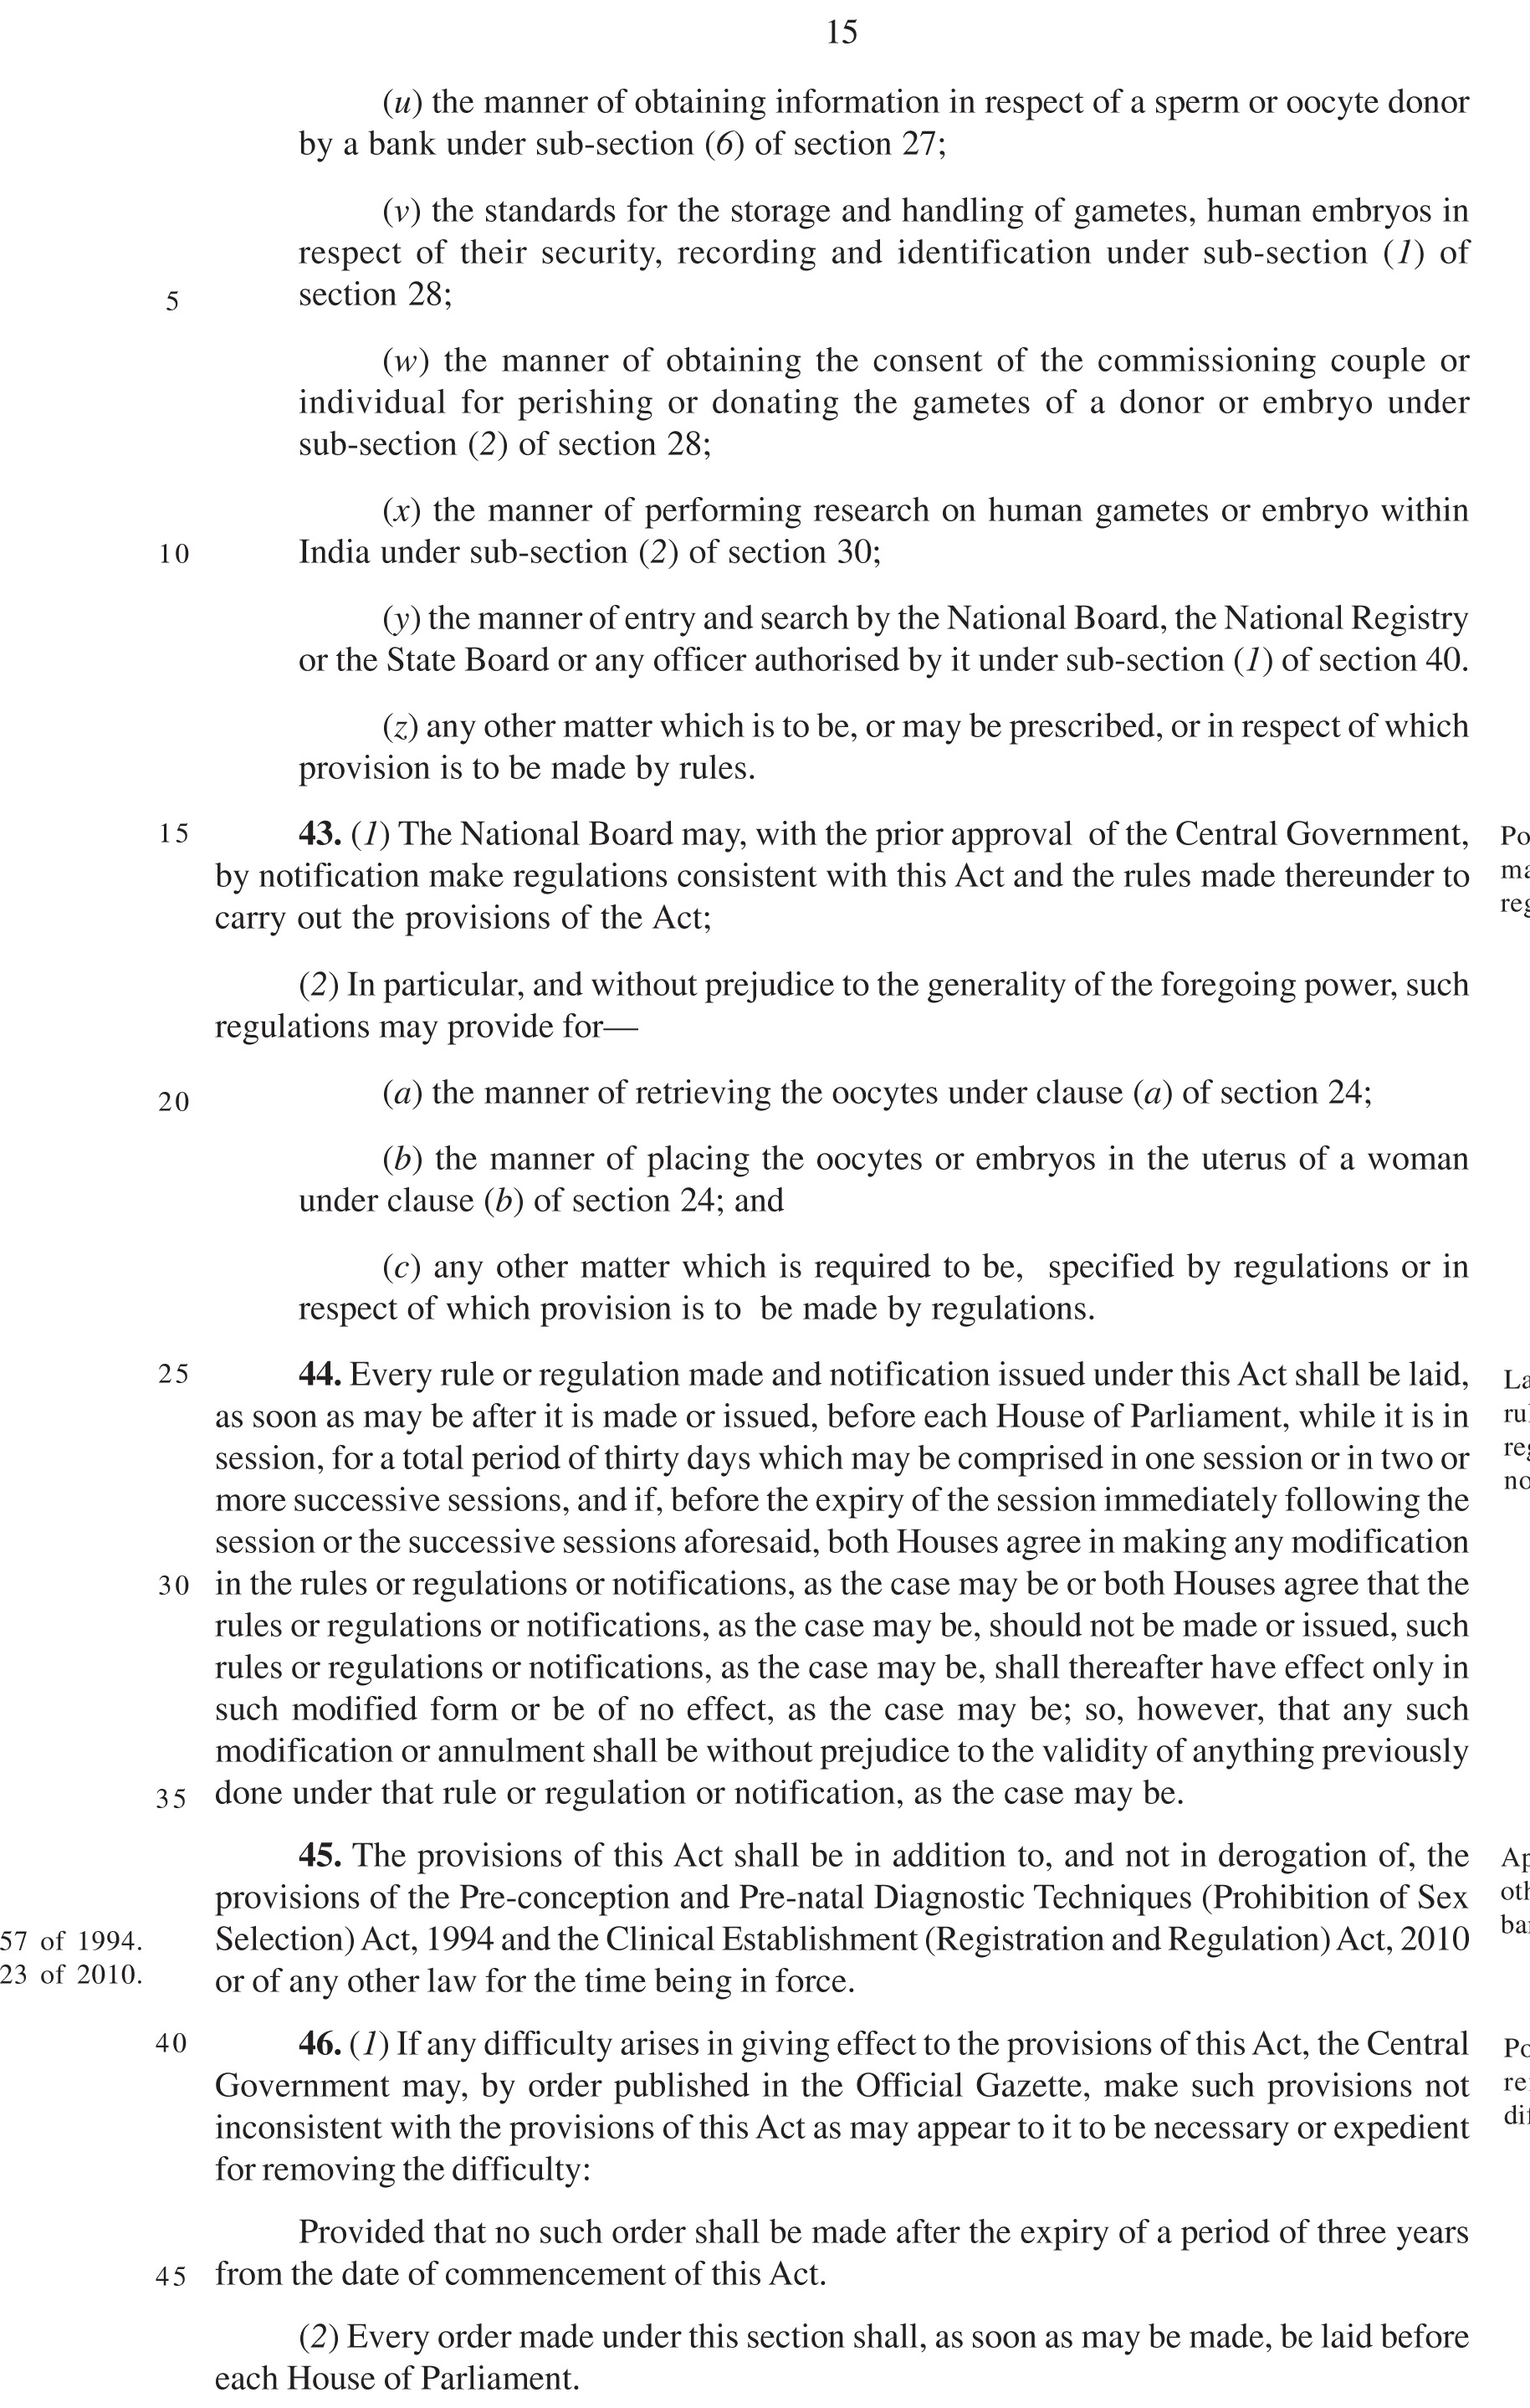 The Assisted Reproductive Technology (Regulation)
Bill-2021